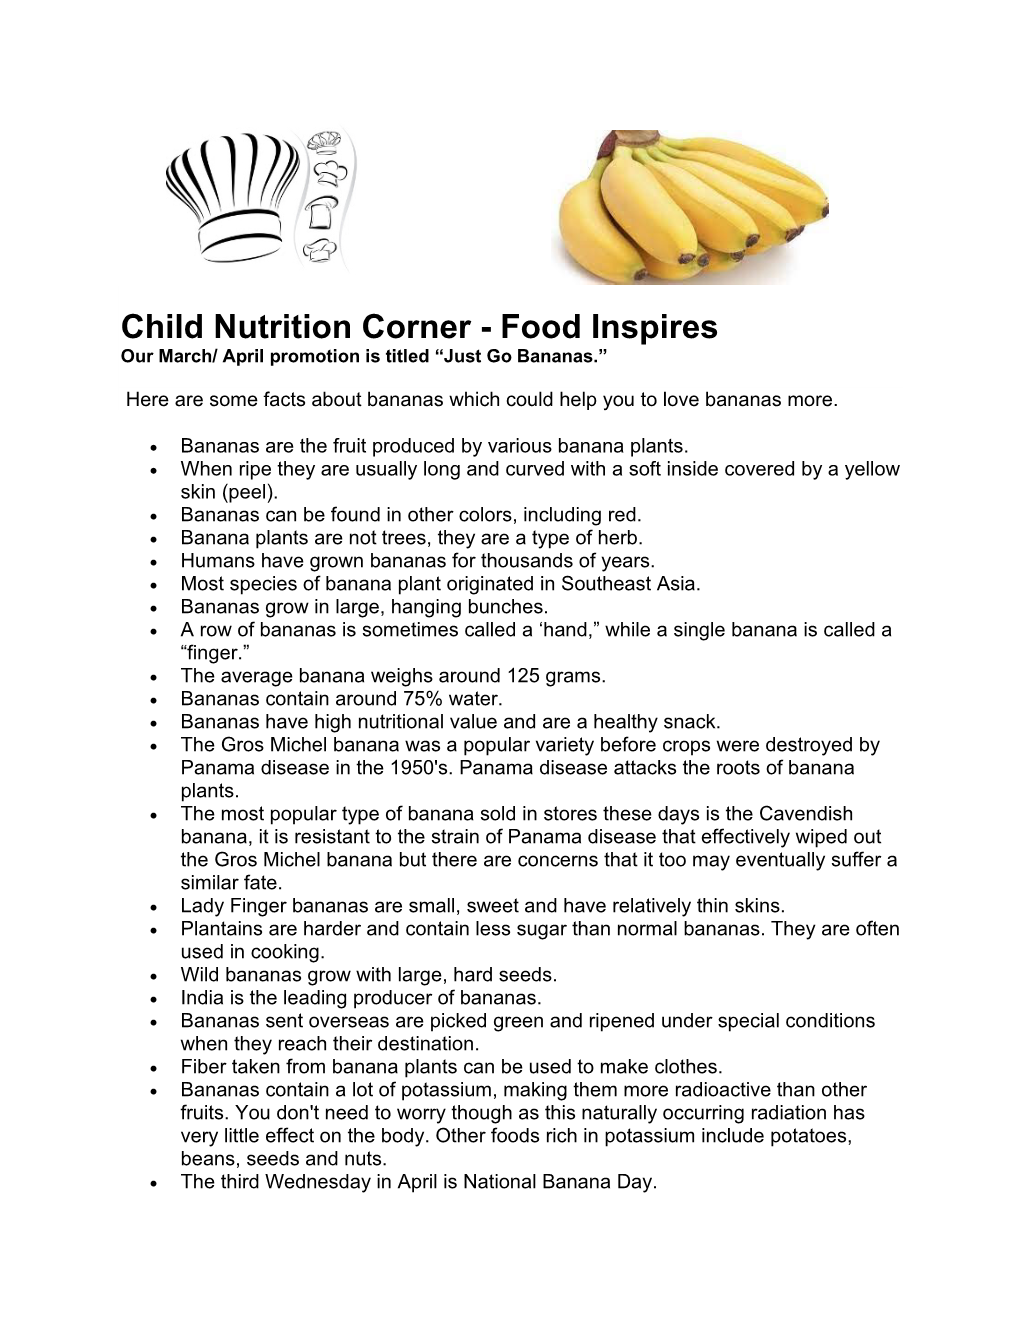 Child Nutrition Corner - Food Inspires Our March/ April Promotion Is Titled “Just Go Bananas.”